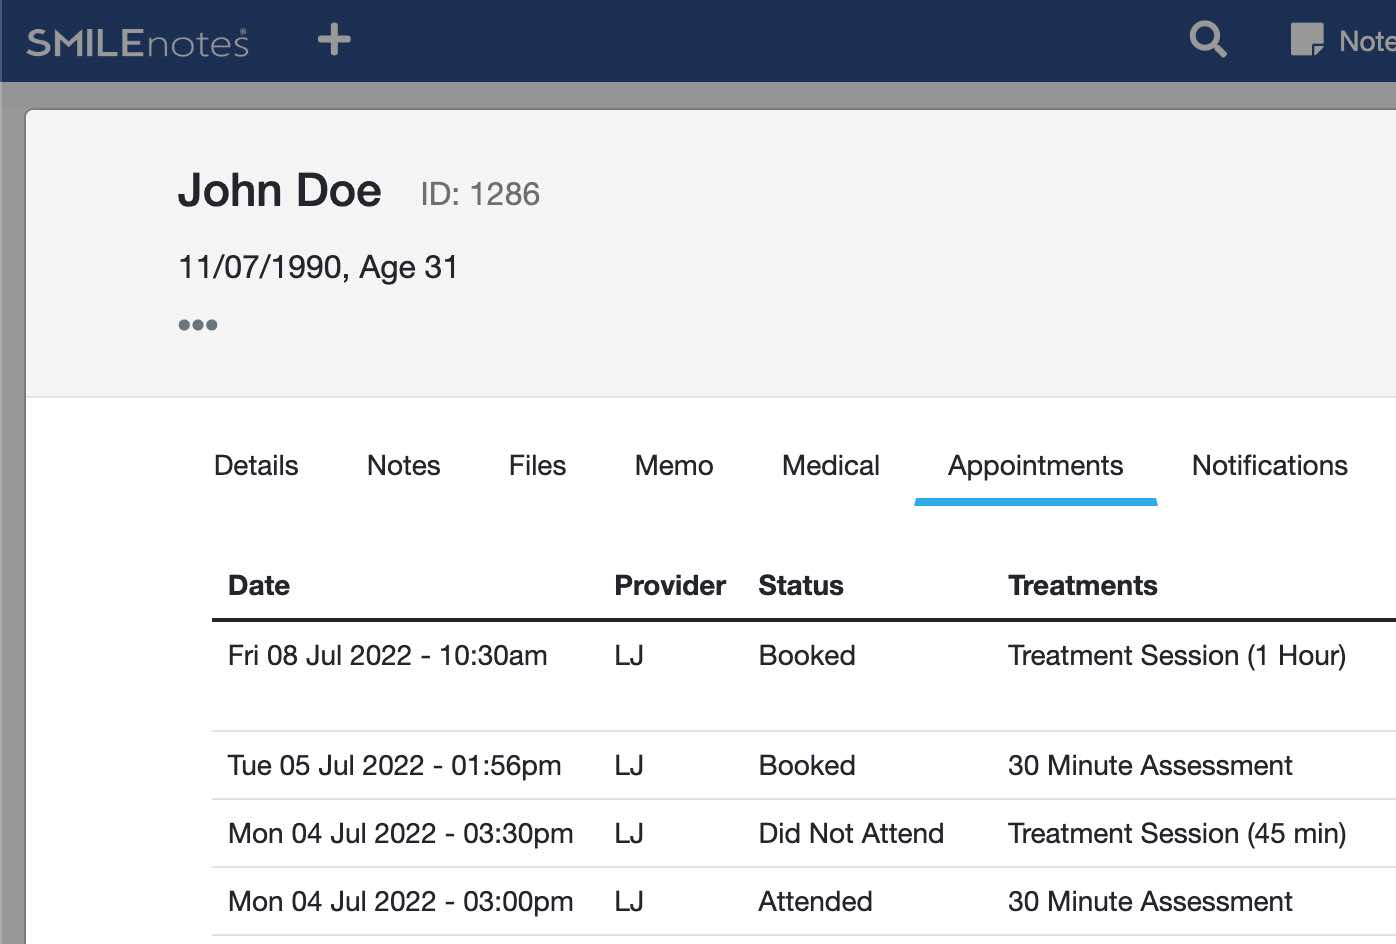 Smilenotes - appointment history record.